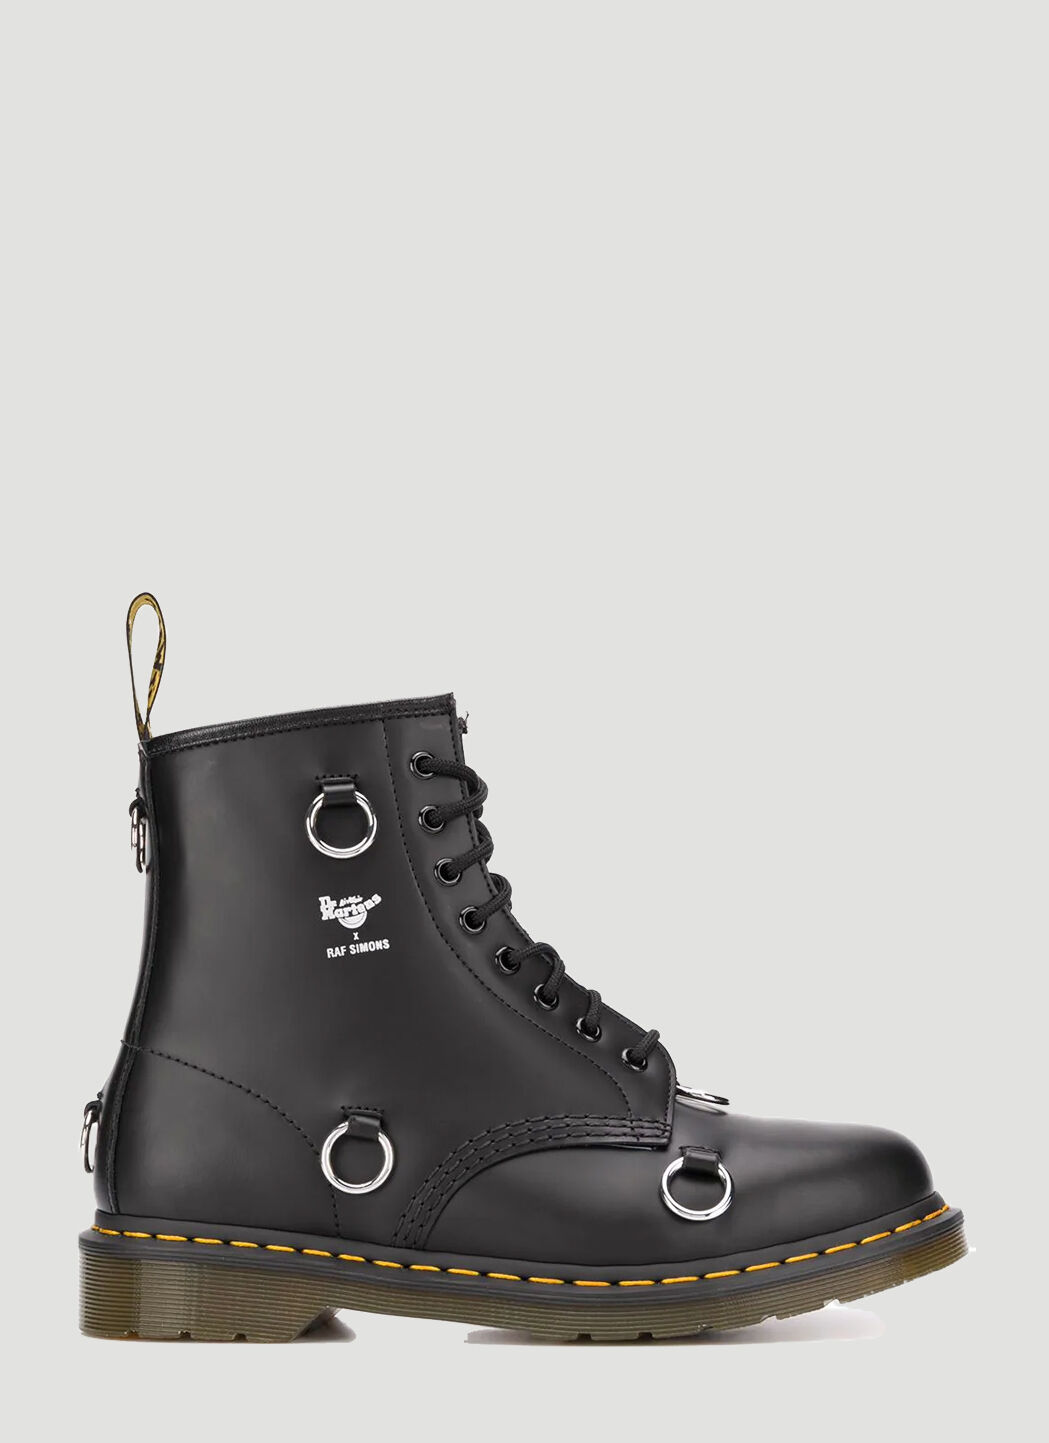 Raf Simons x Fred Perry X Dr. Martens Edition Ring-Embellished Boots 黑色 rsf0152002